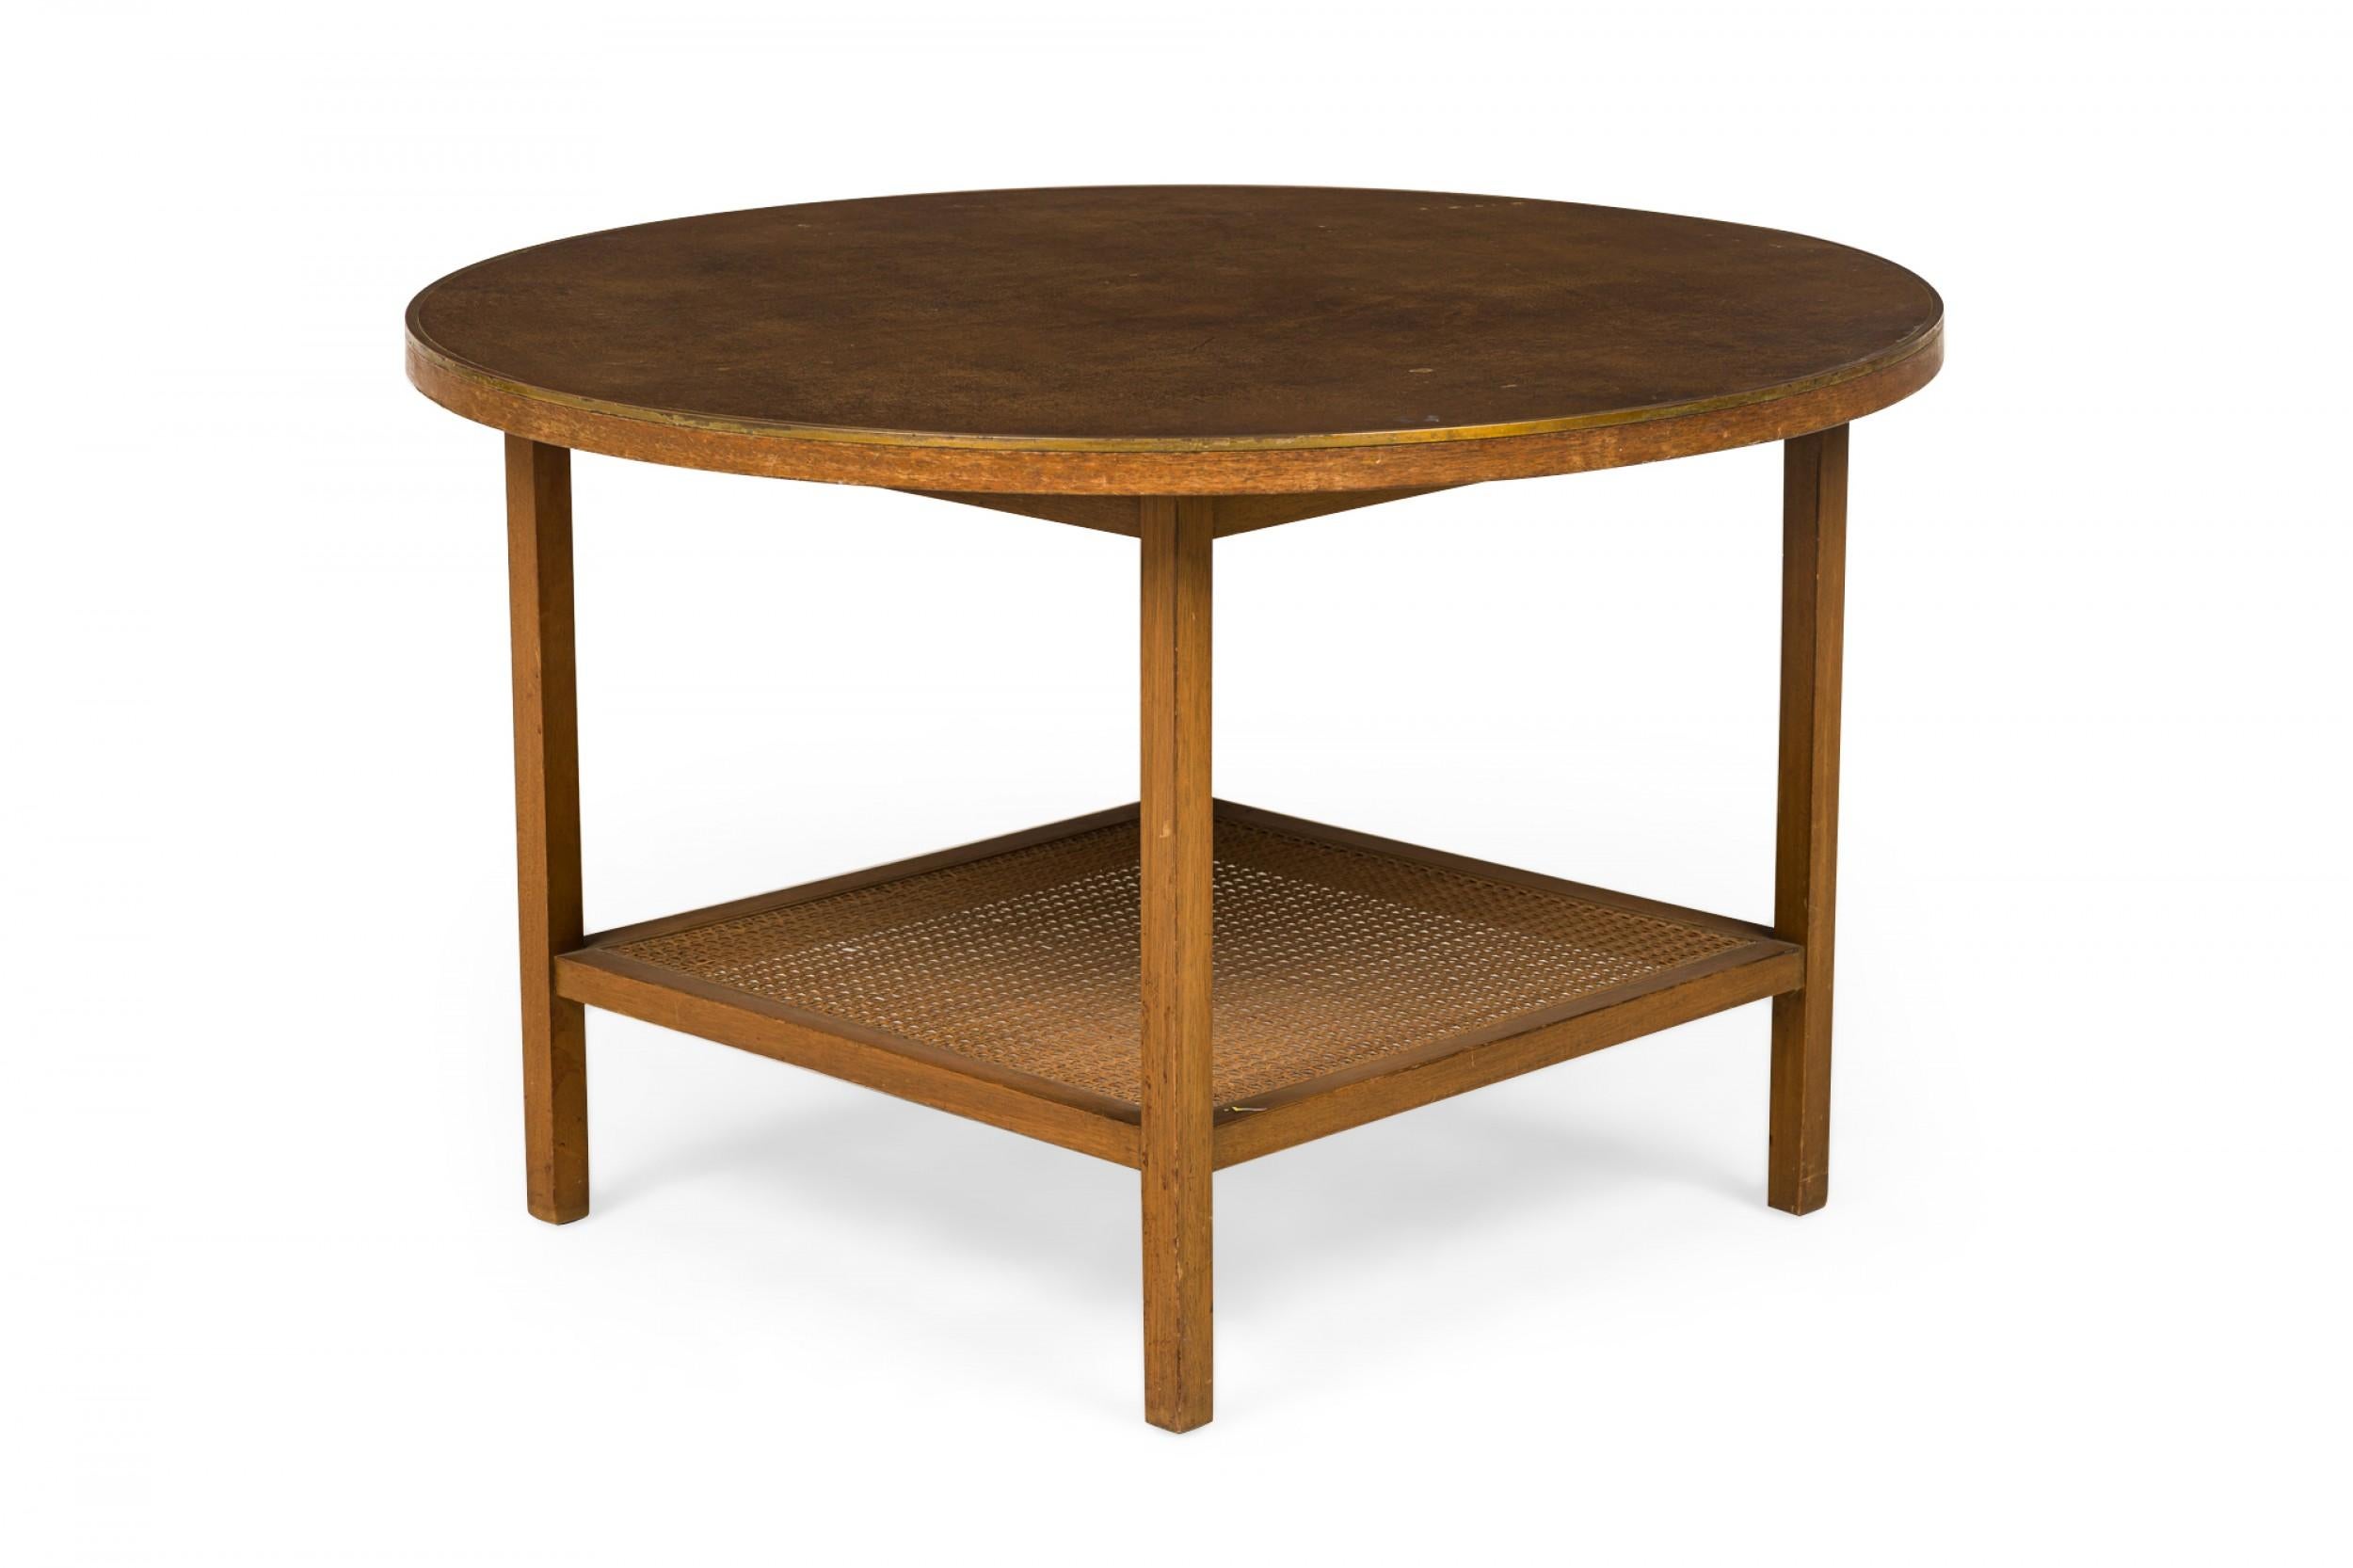 American Mid-Century end / side table with a round leather top trimmed in brass, resting on four square wooden legs with a lower square caned stretcher shelf. (PAUL MCCOBB FOR CALVIN FURNITURE COMPANY).